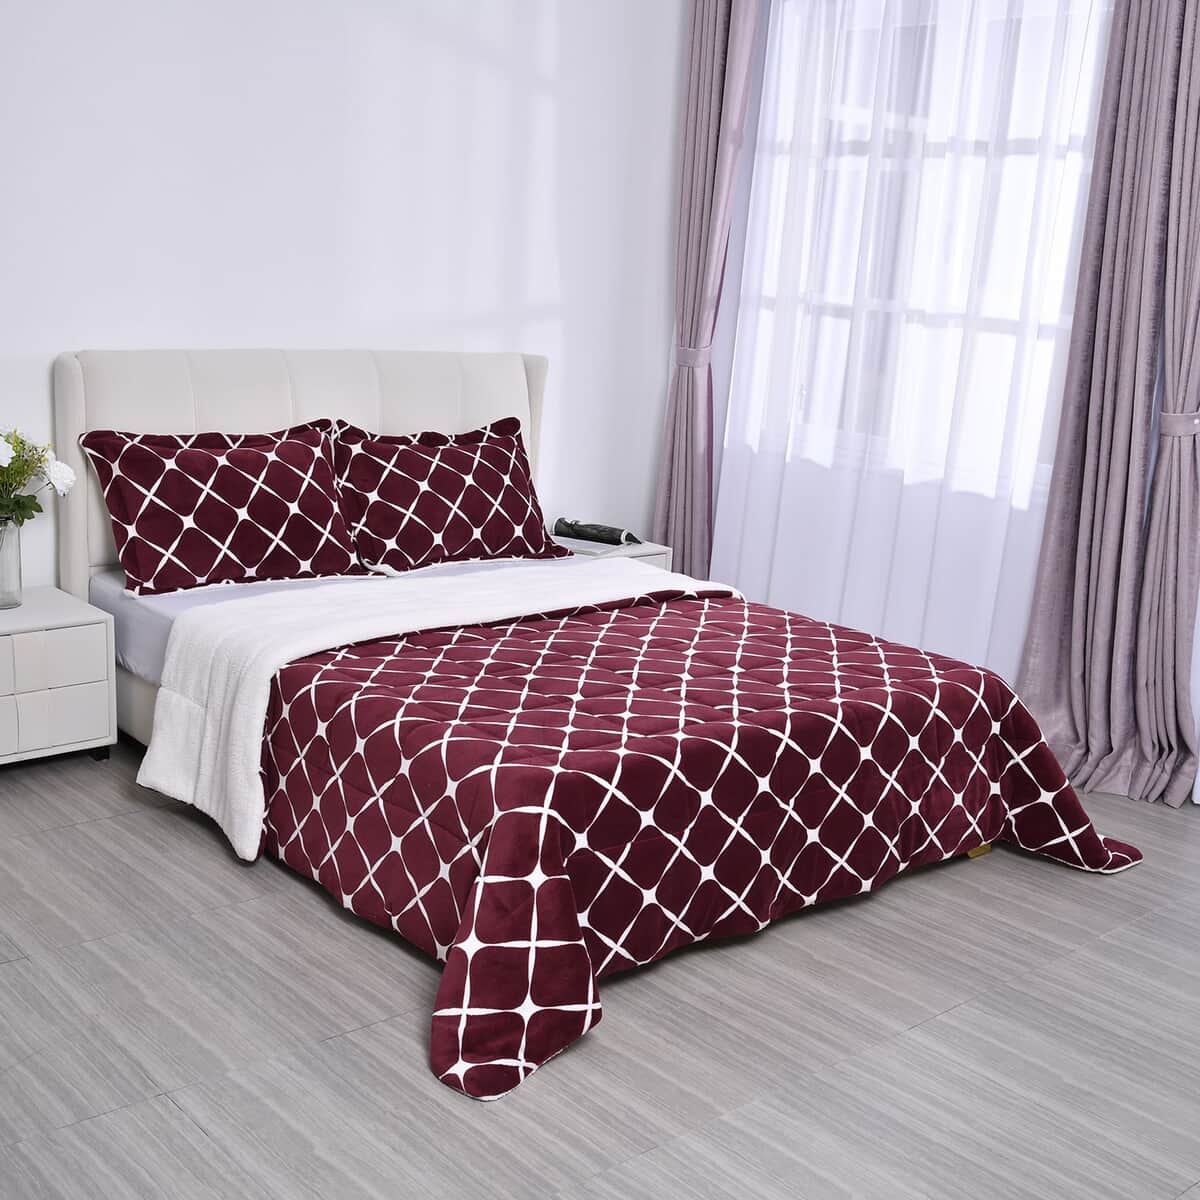 Buy Homesmart Purple 3 Layer Quilted Microfiber Flannel and Sherpa  Reversible Comforter and Set of 2 Shams, Microfiber Comforter, Best  Comforter Sets, Bed Comforters, Comforter Set for Bedroom at ShopLC.